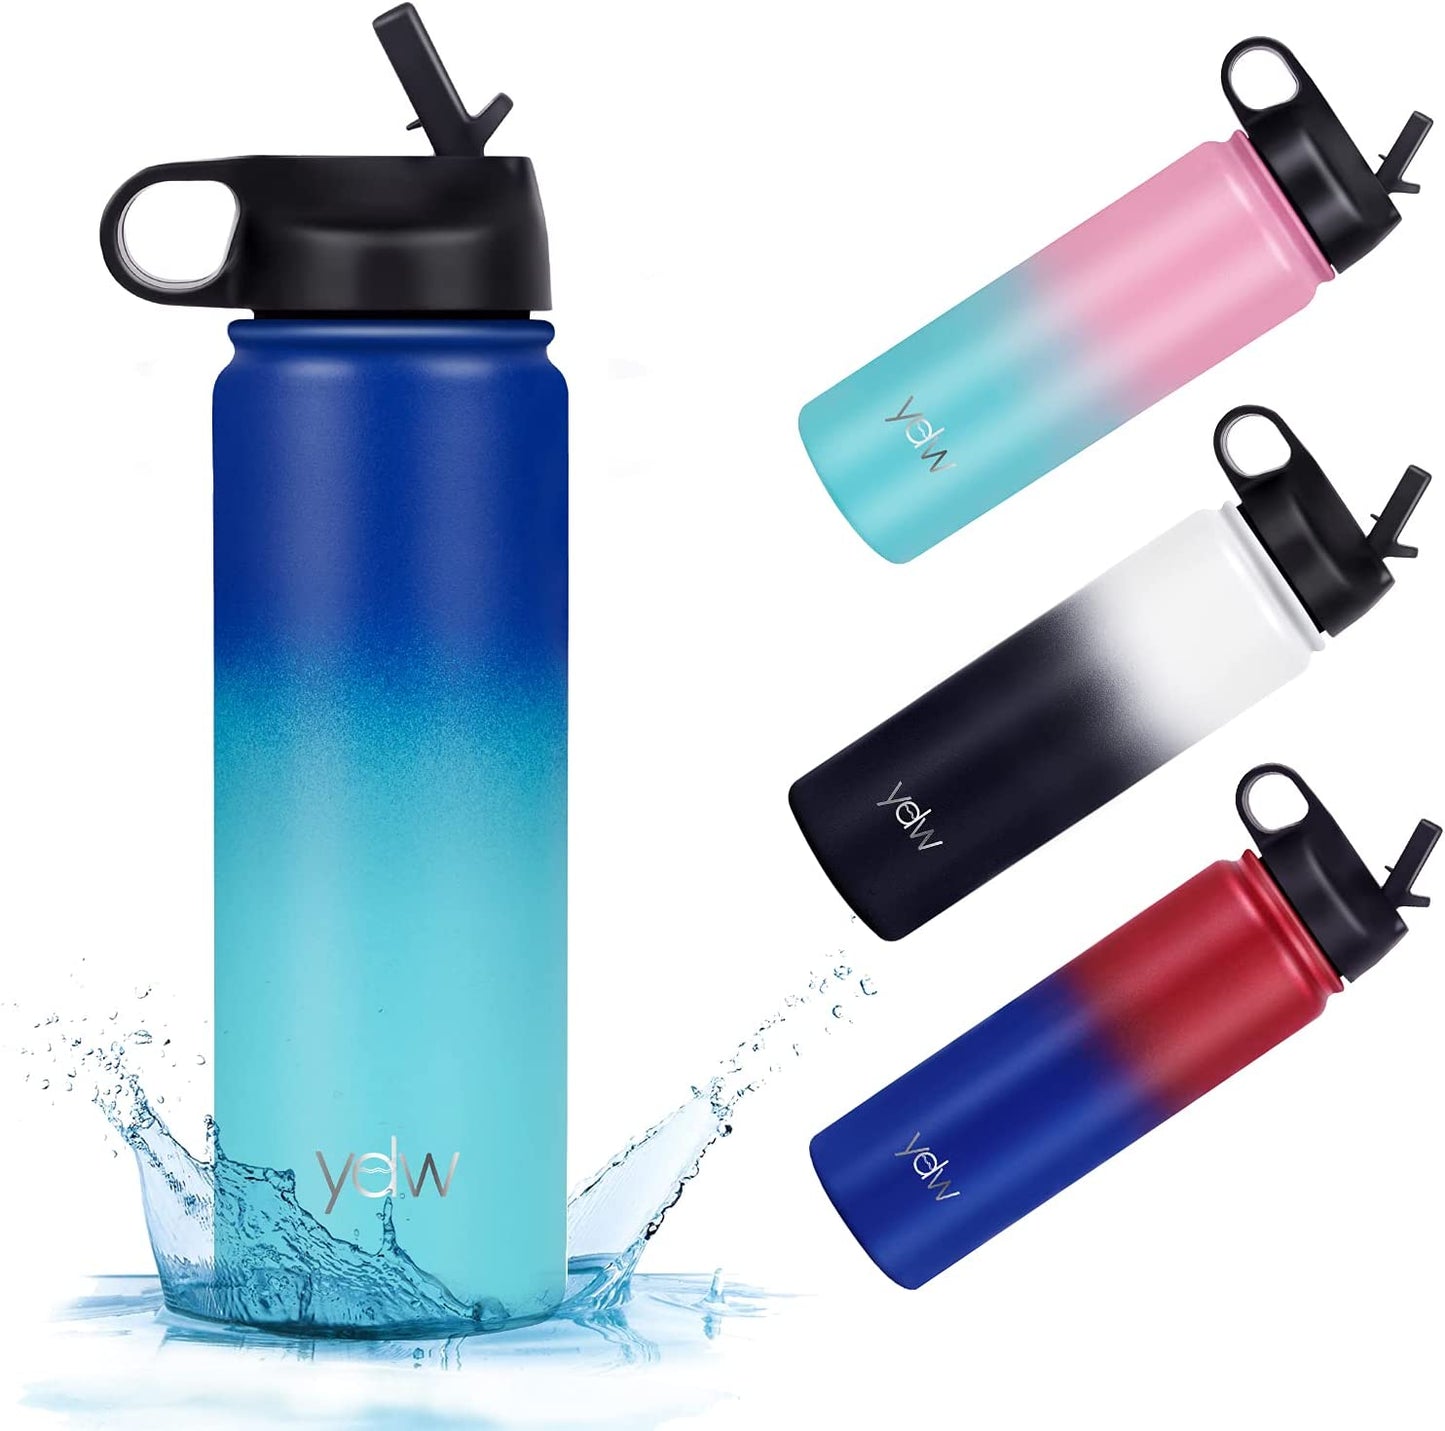 Stainless Steel Double Wall Water Bottle, Sweat-Proof Vacuum Insulated Bottle with Straw Lid (18Oz, 22Oz, 32Oz), BPA Free to Keep Beverages Cold for 24 Hrs or Hot for 12 Hrs